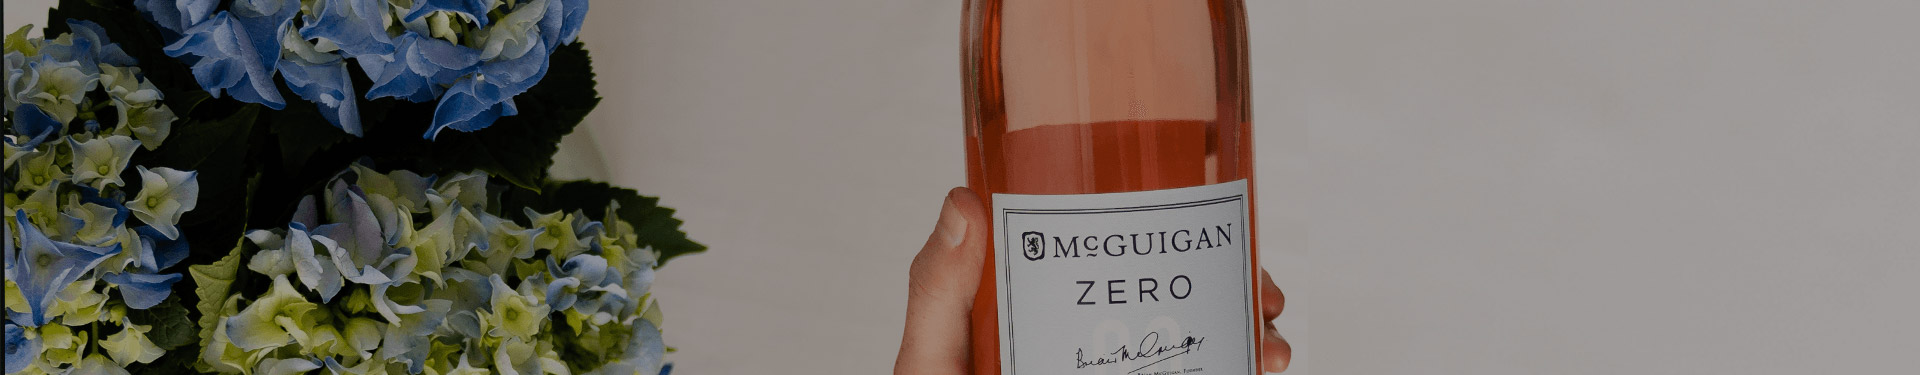 McGuigan Zero Rose Bottle being poured into a glass